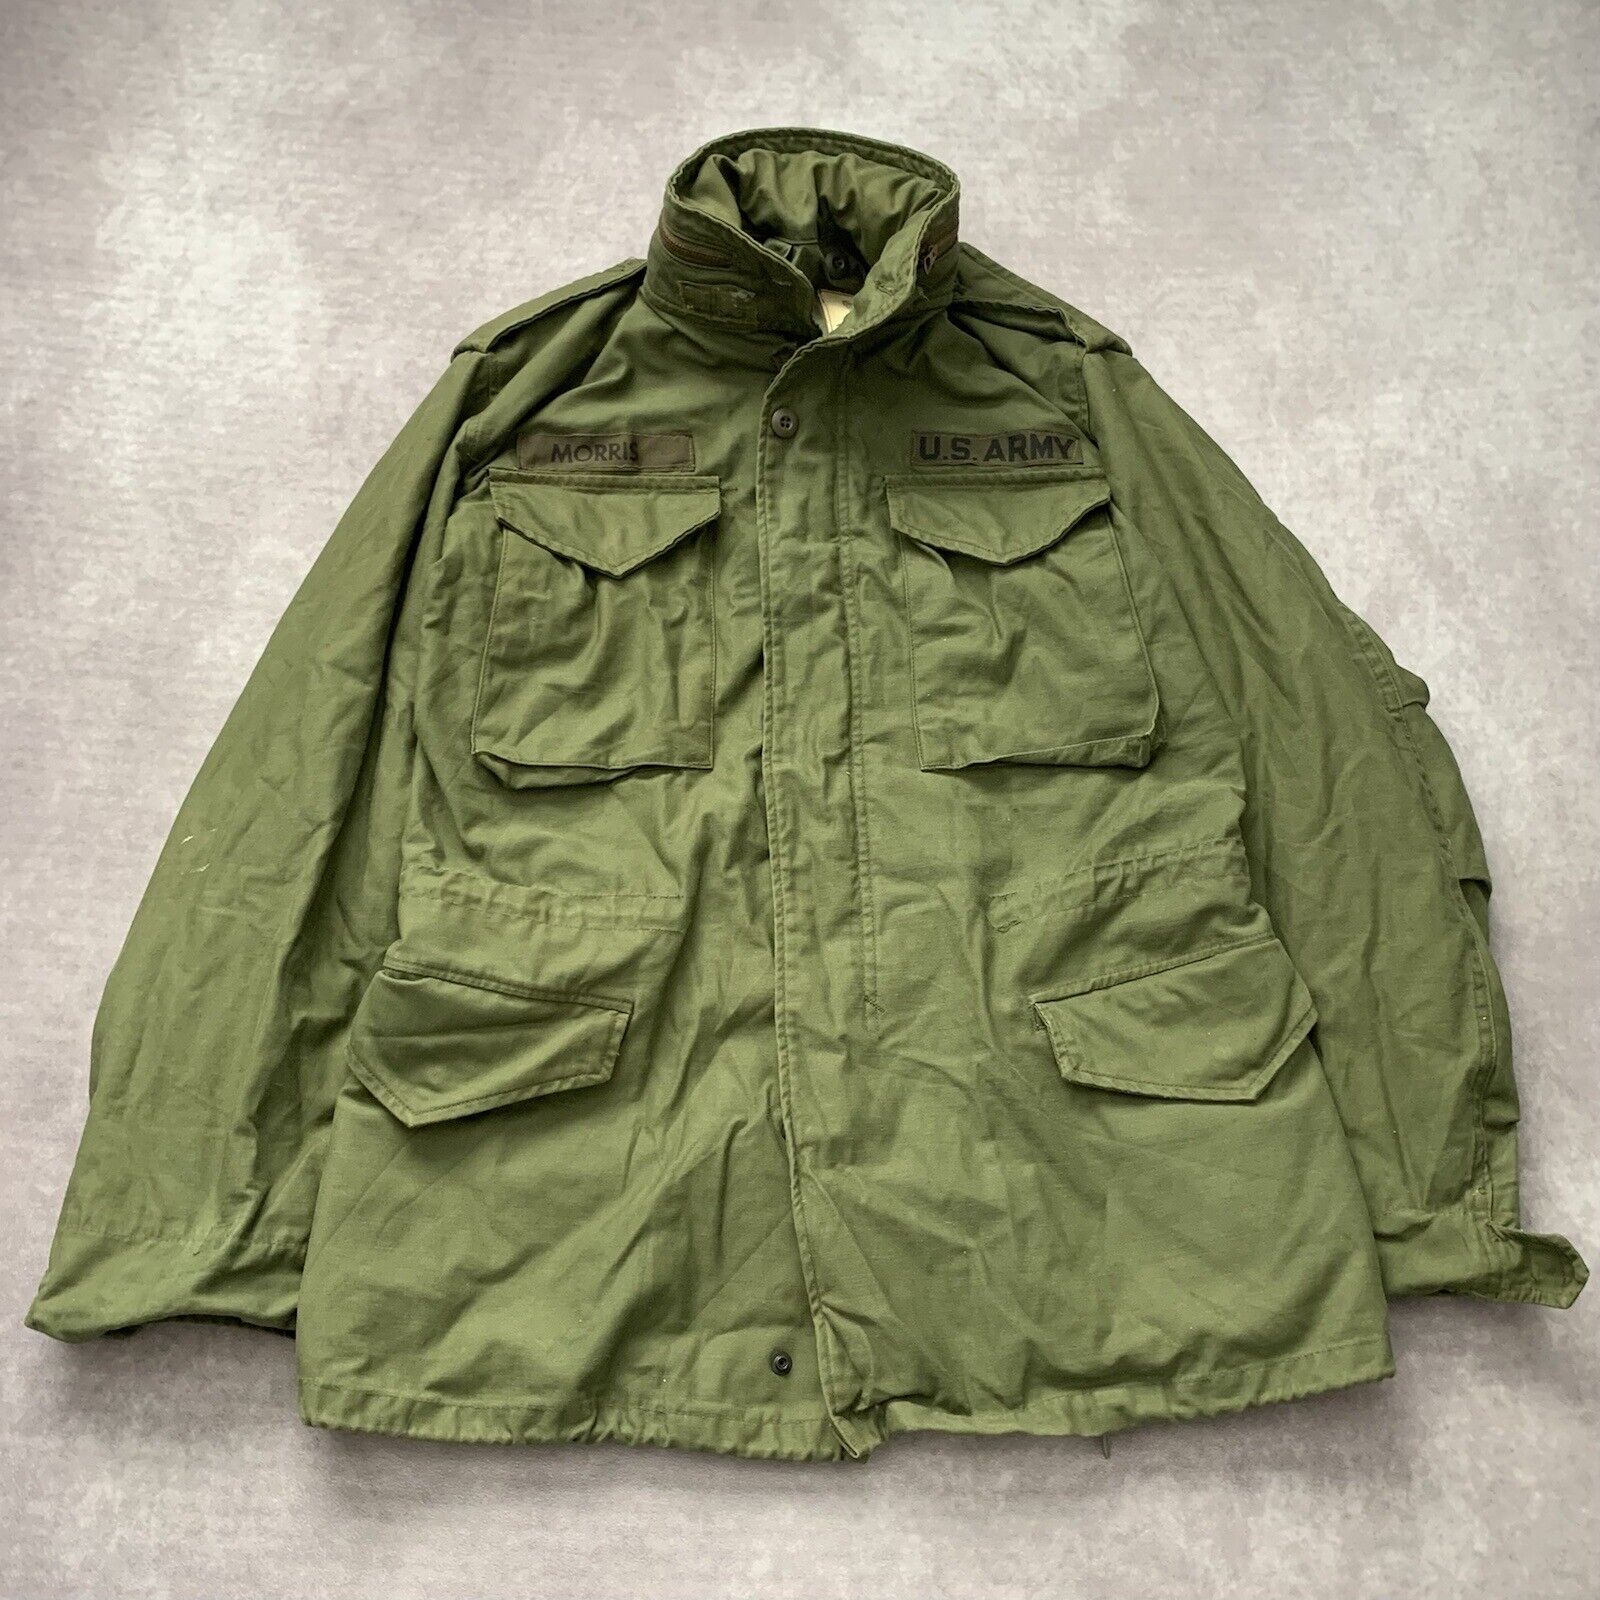 Vintage 60s 70s OG-107 Cold Weather Field Jacket Size Small Long Army Vietnam